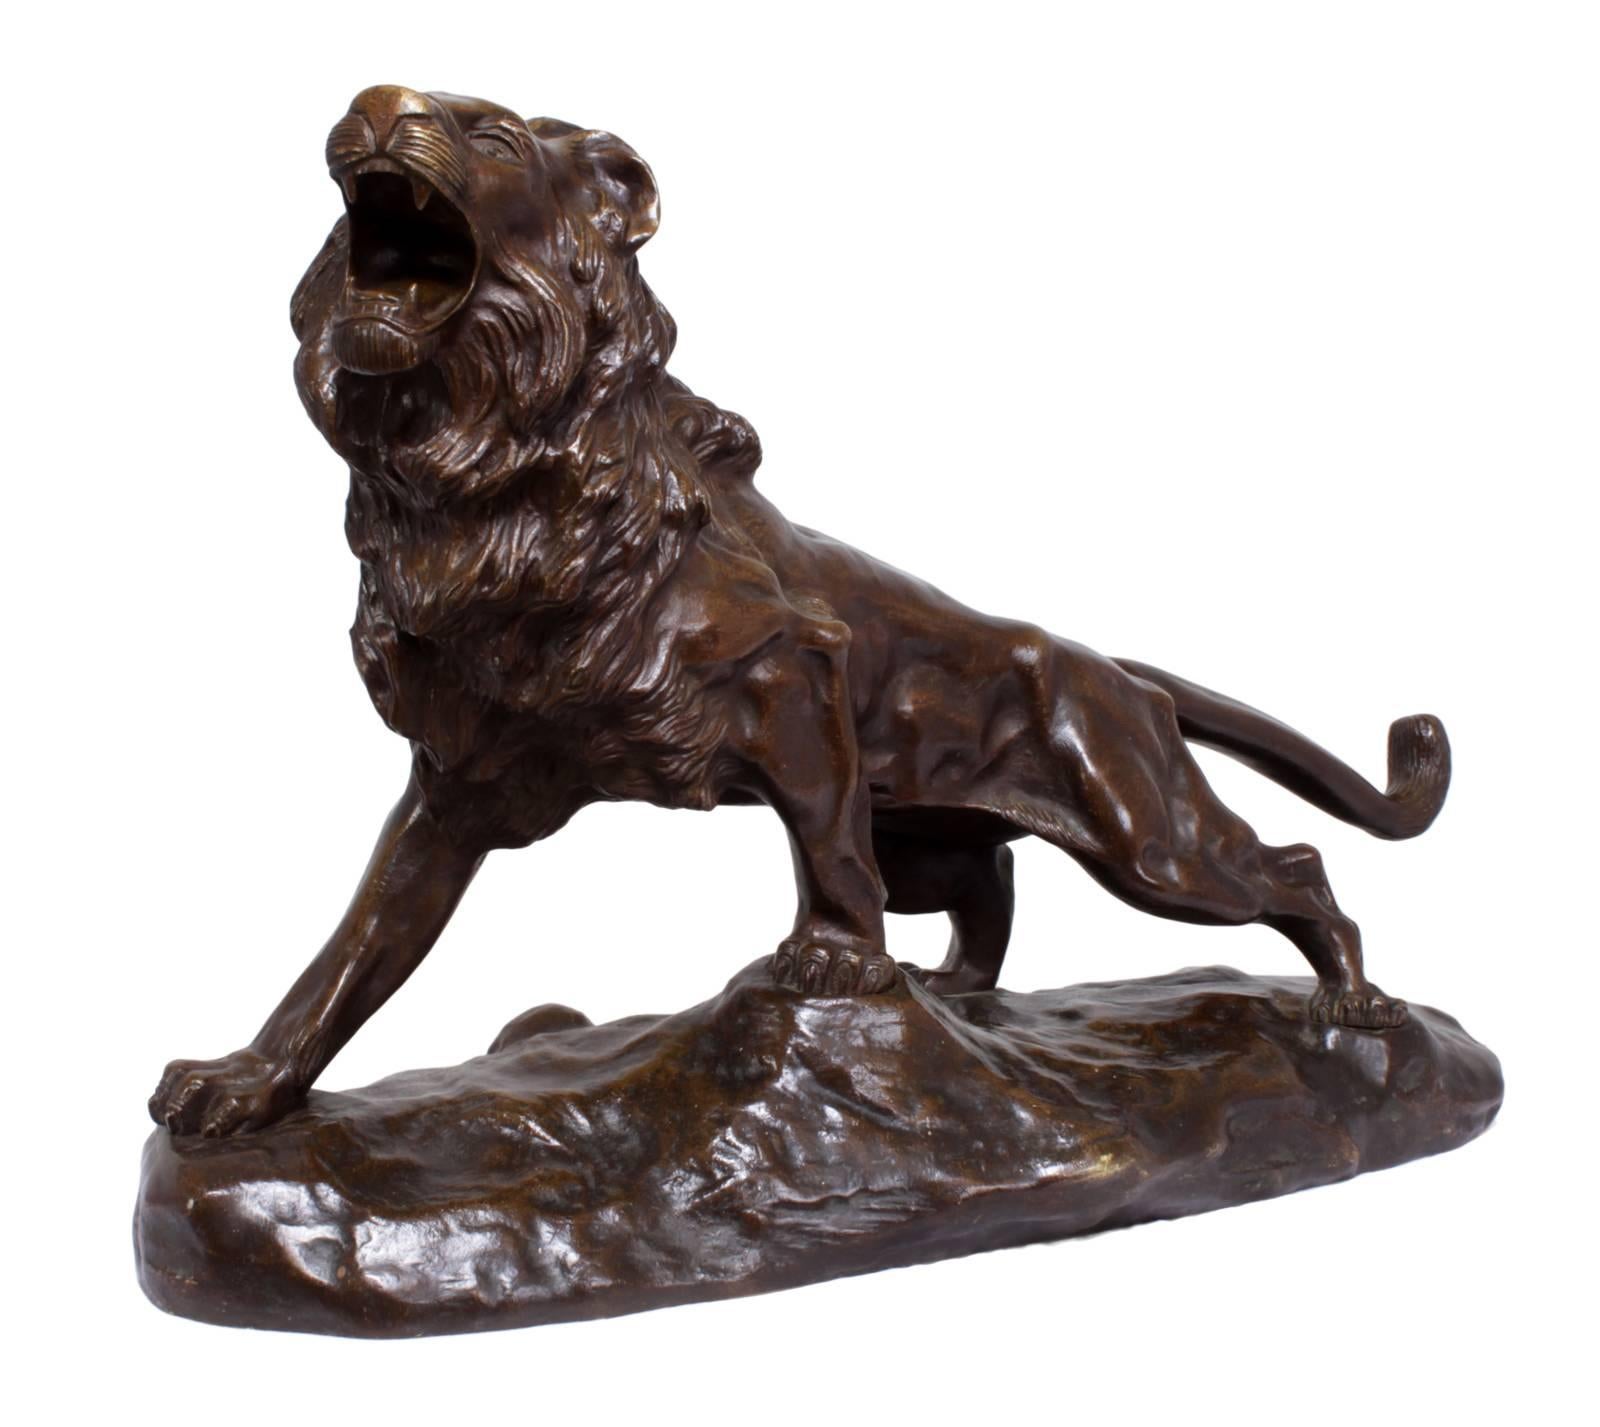 Large bronze sculpture of a lion by James Andrey 
large bronze casting of a lion on a rock by James Andrey cast circa 1925, with beautiful aging patina in very good condition (unsigned)
Age: 1925
Style: Sculpture
Material: Bronze
Condition: